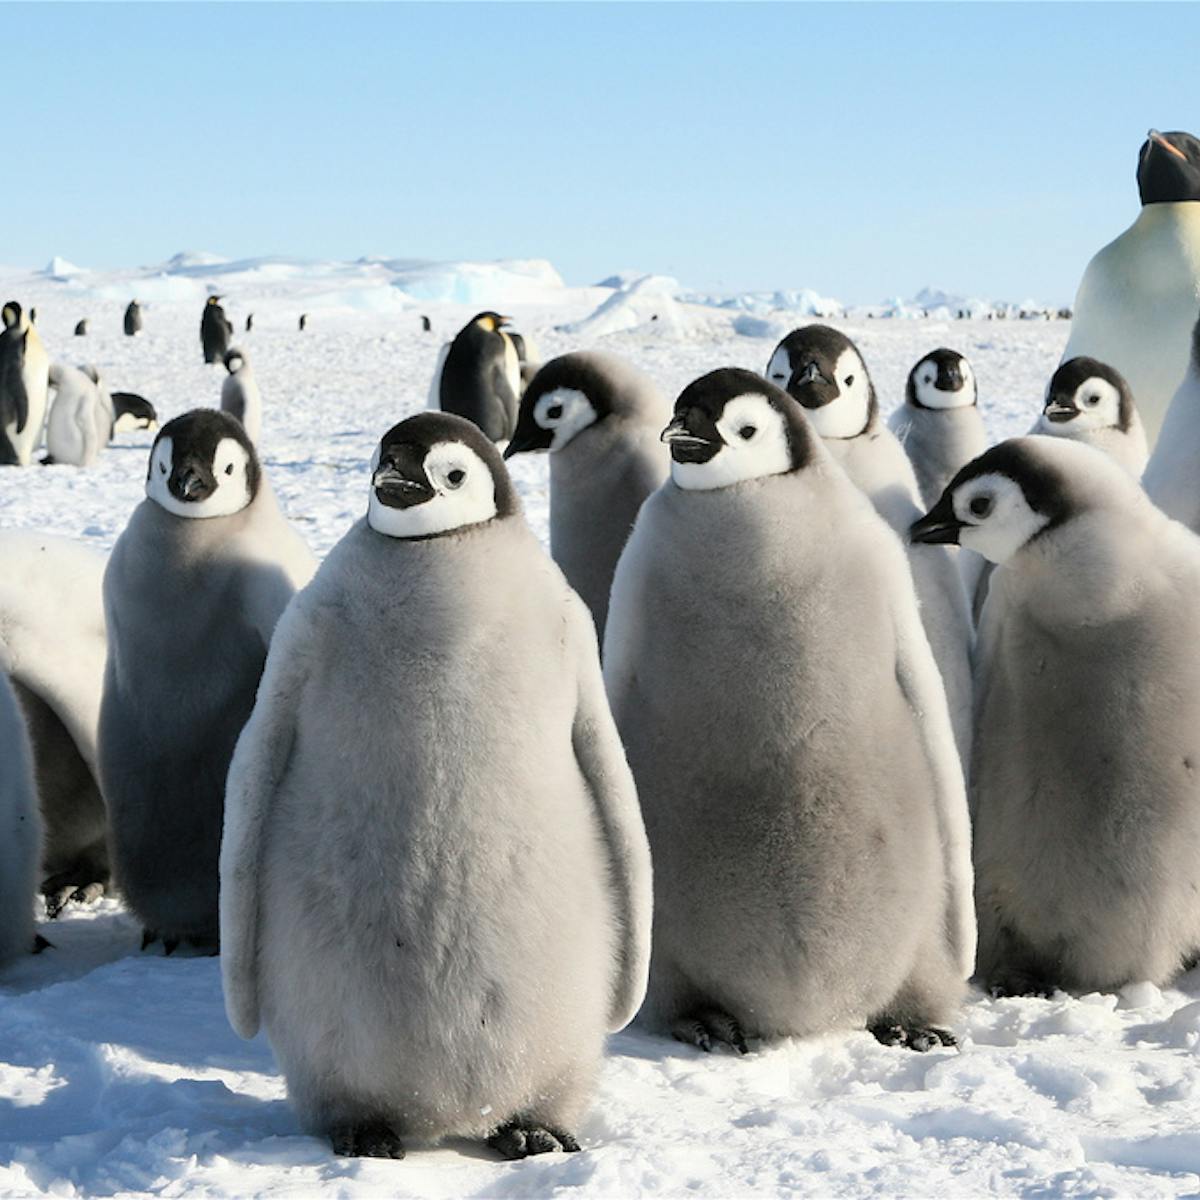 Was penguin evolution driven by a cooling Antarctic?